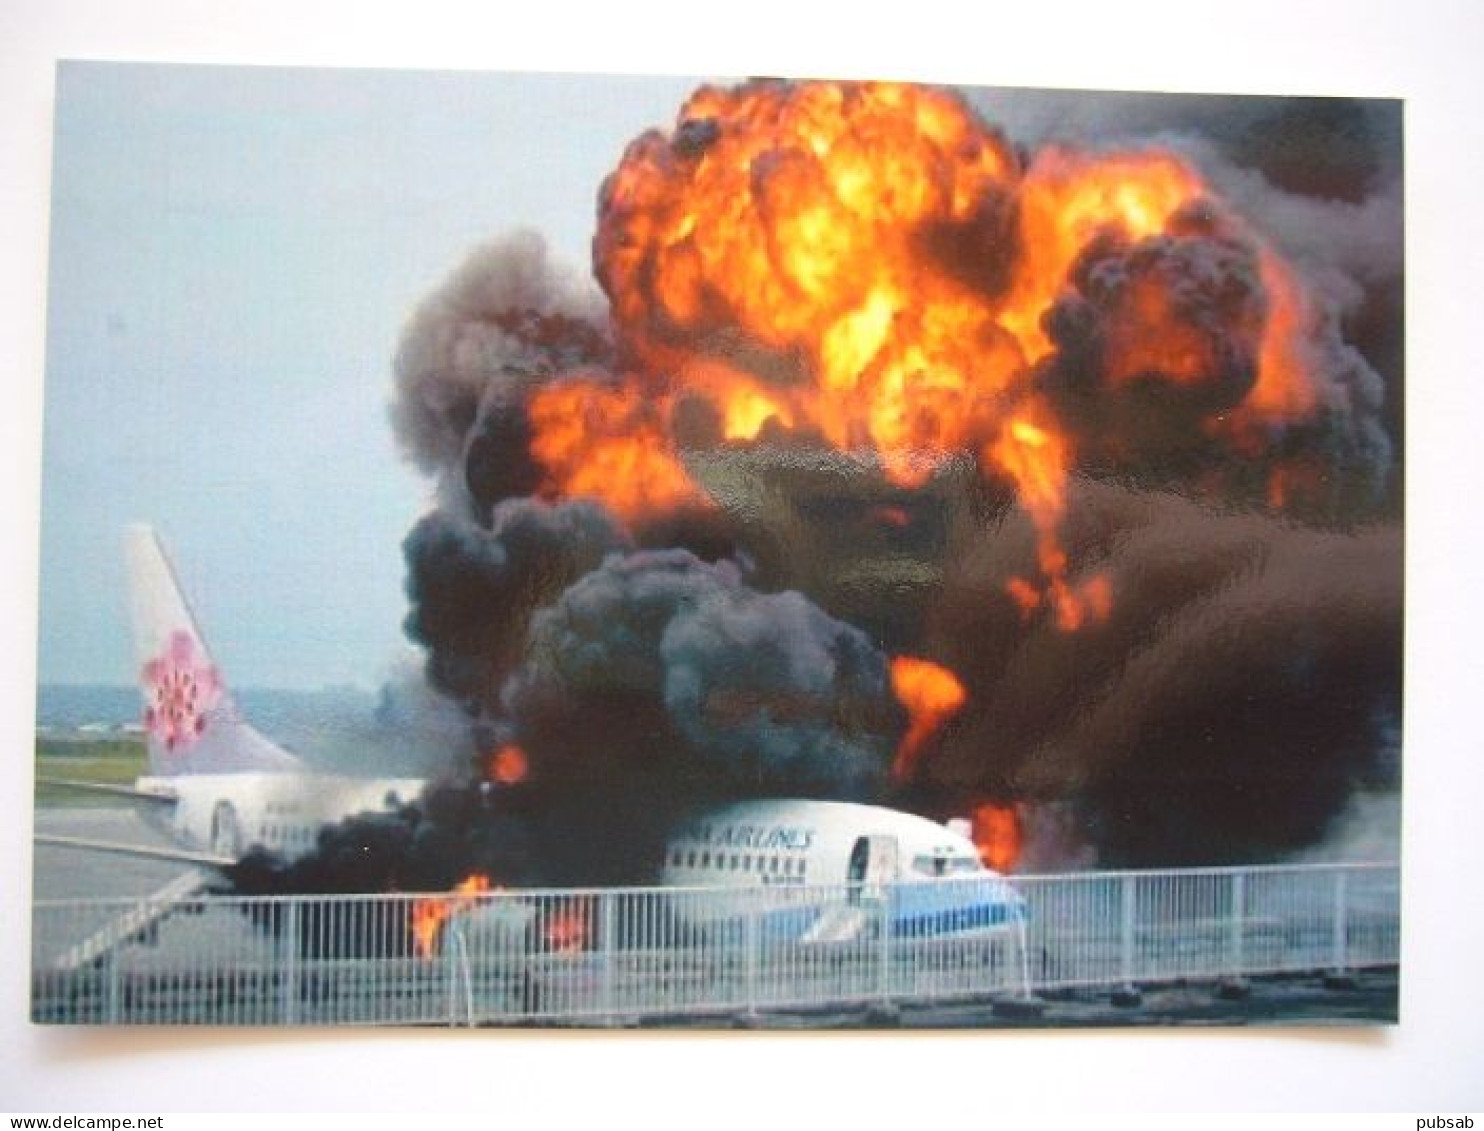 Avion / Airplane / CHINA AIRLINES / Boeing 737 / Explosion At The Gate / Naha Airport, Okinawa Island / Aug 20, 2007 - Accidents